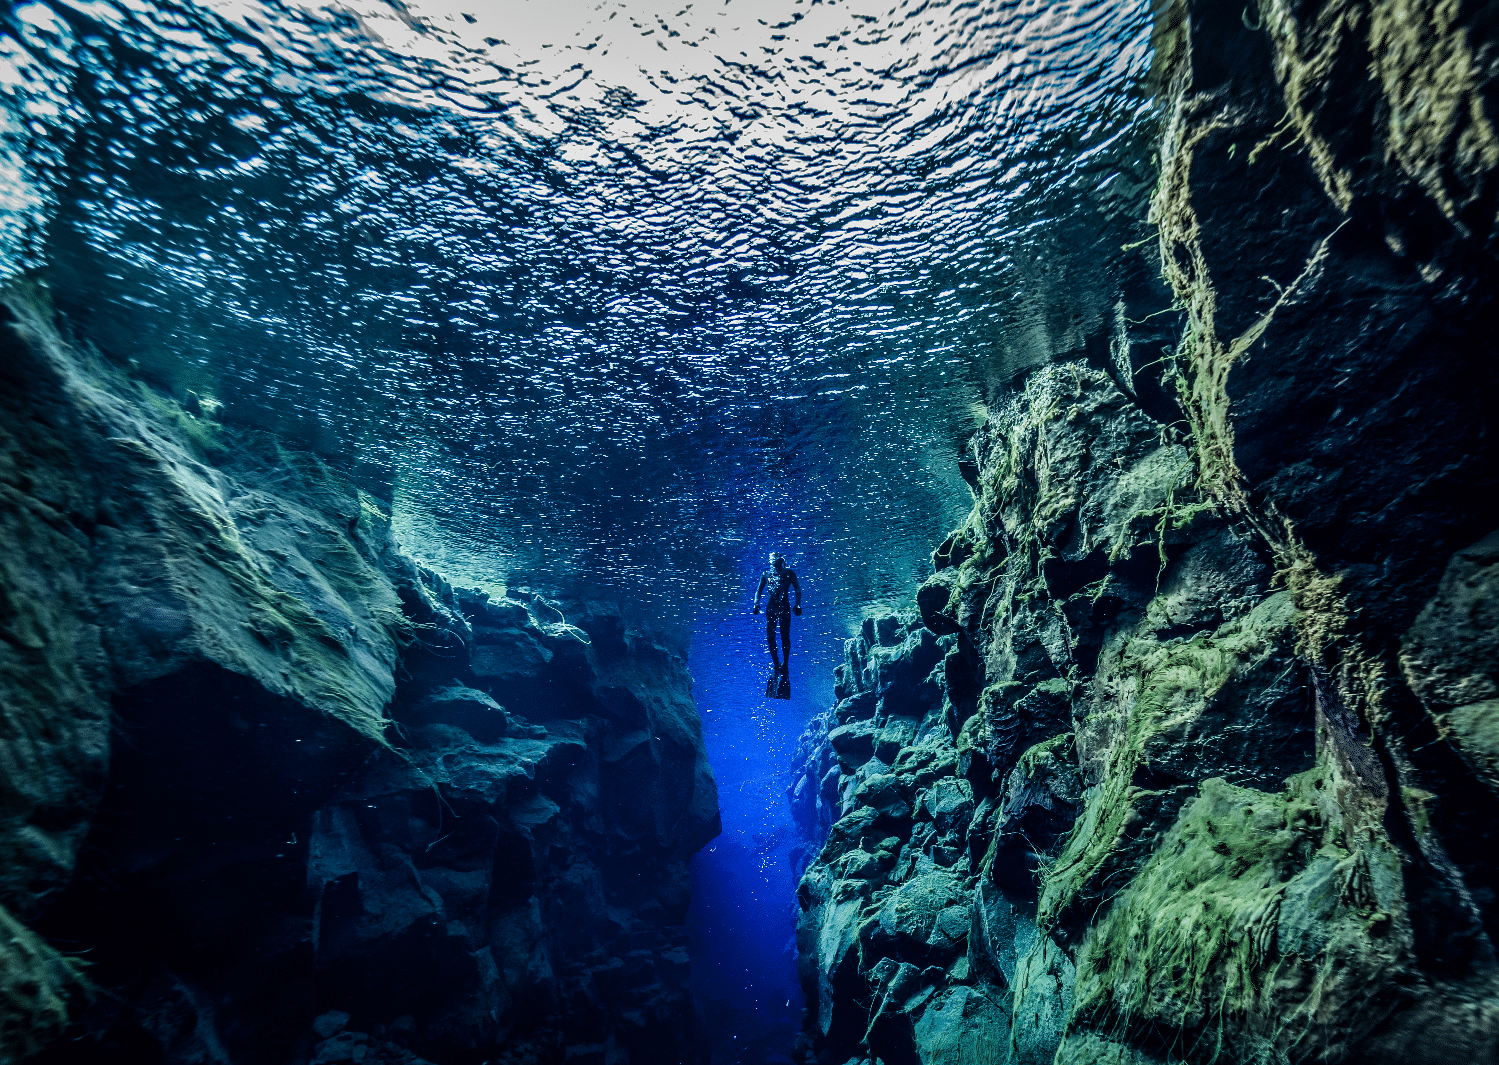 Dive deeper than ever before! Explore Earth's most unique and unforgettable underwater destinations.